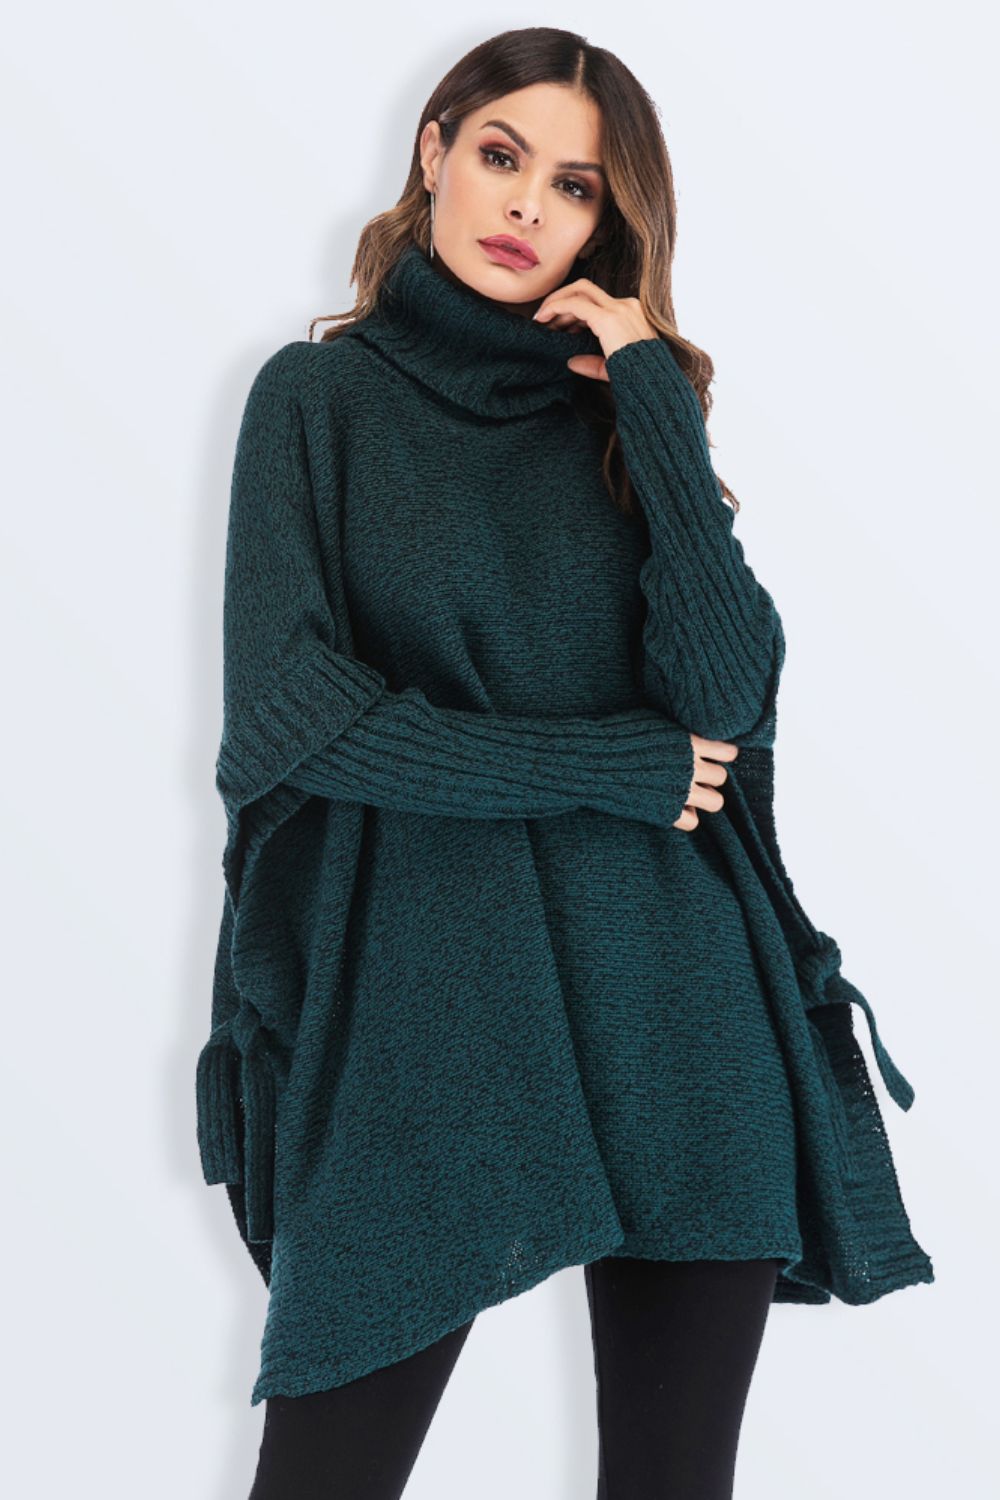 Tied Turtleneck Asymmetrical Hem Sweater Print on any thing USA/STOD clothes